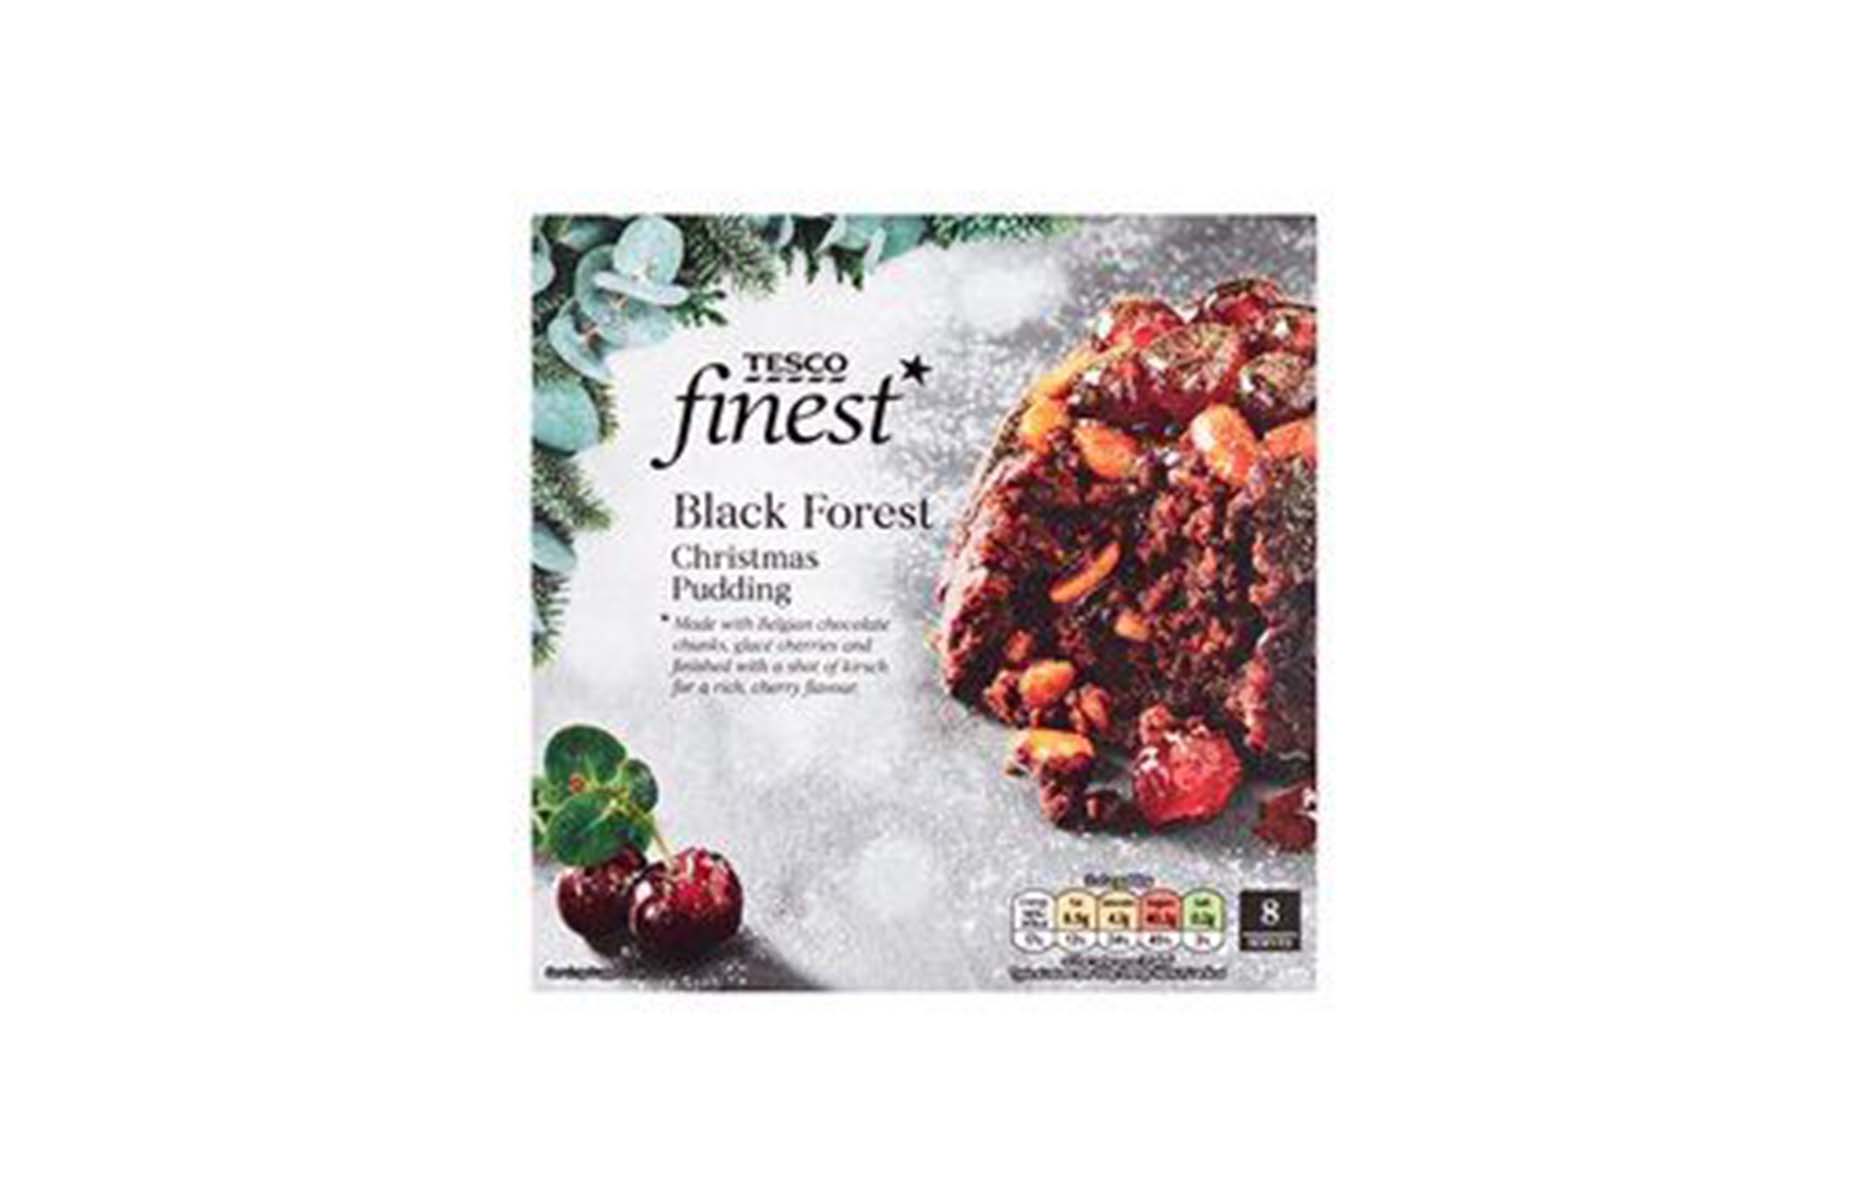 Tesco Finest Black Forest Christmas pudding 2021